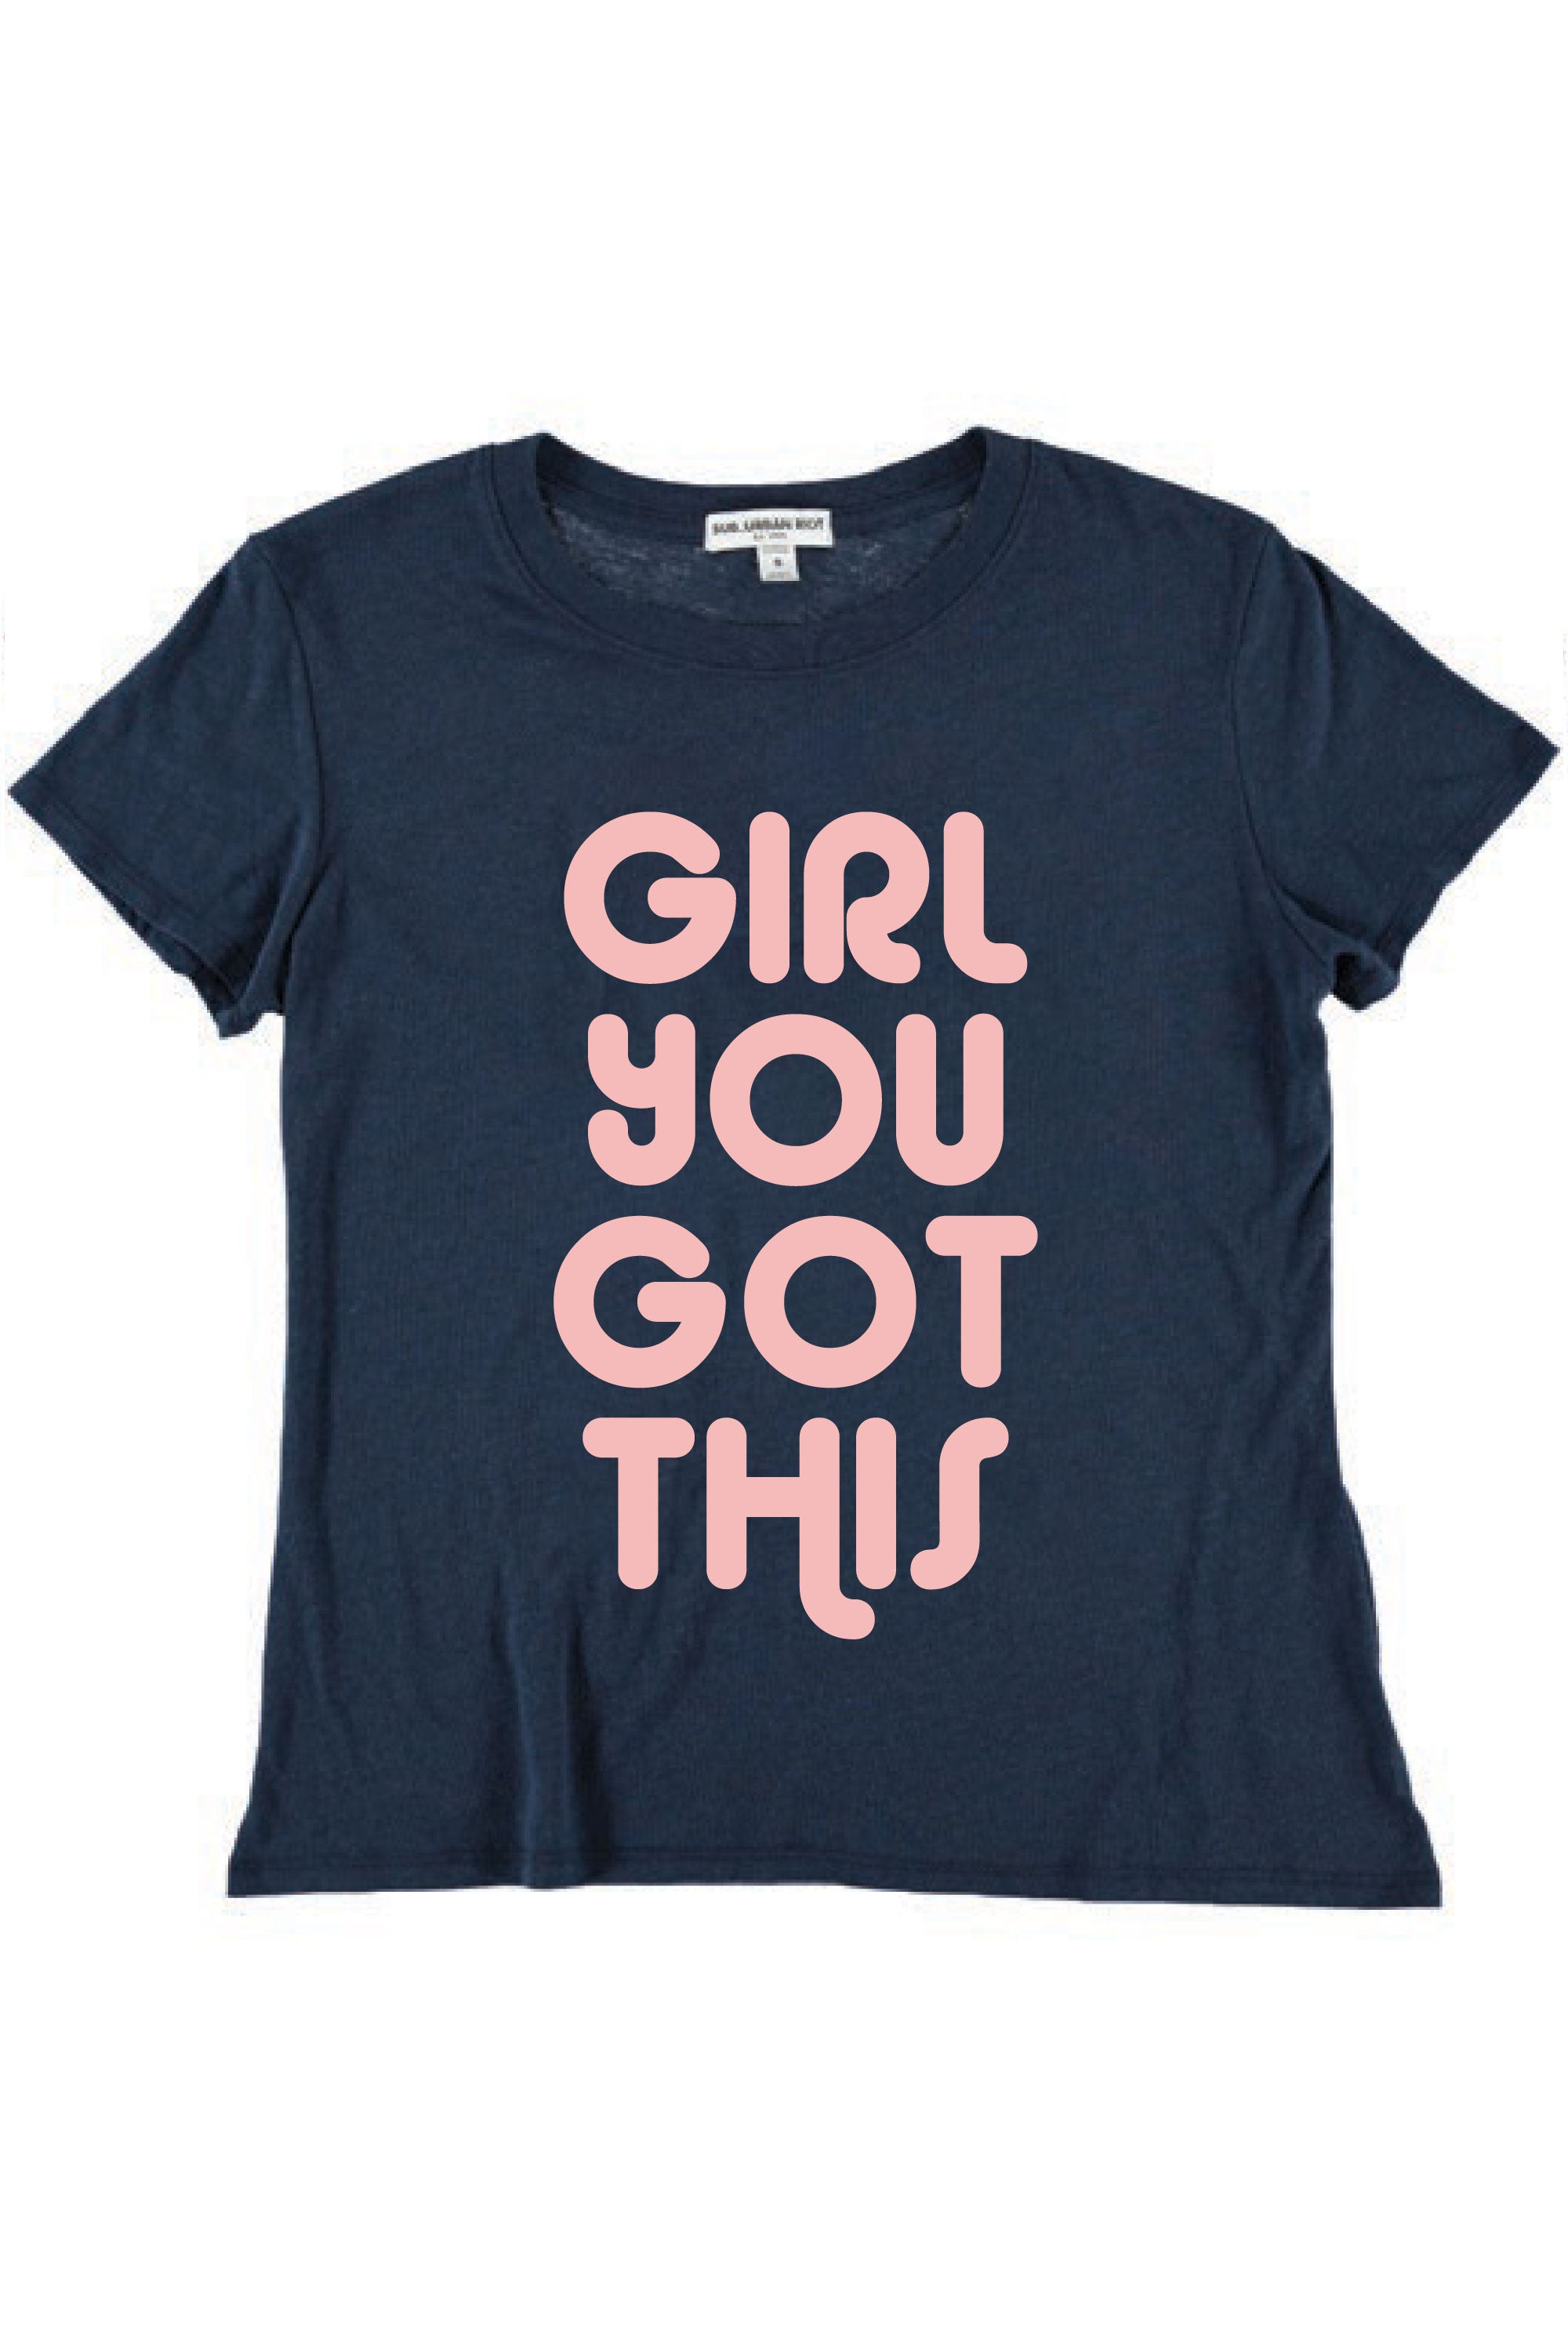 GIRL YOU GOT THIS YOUTH SIZE LOOSE TEE